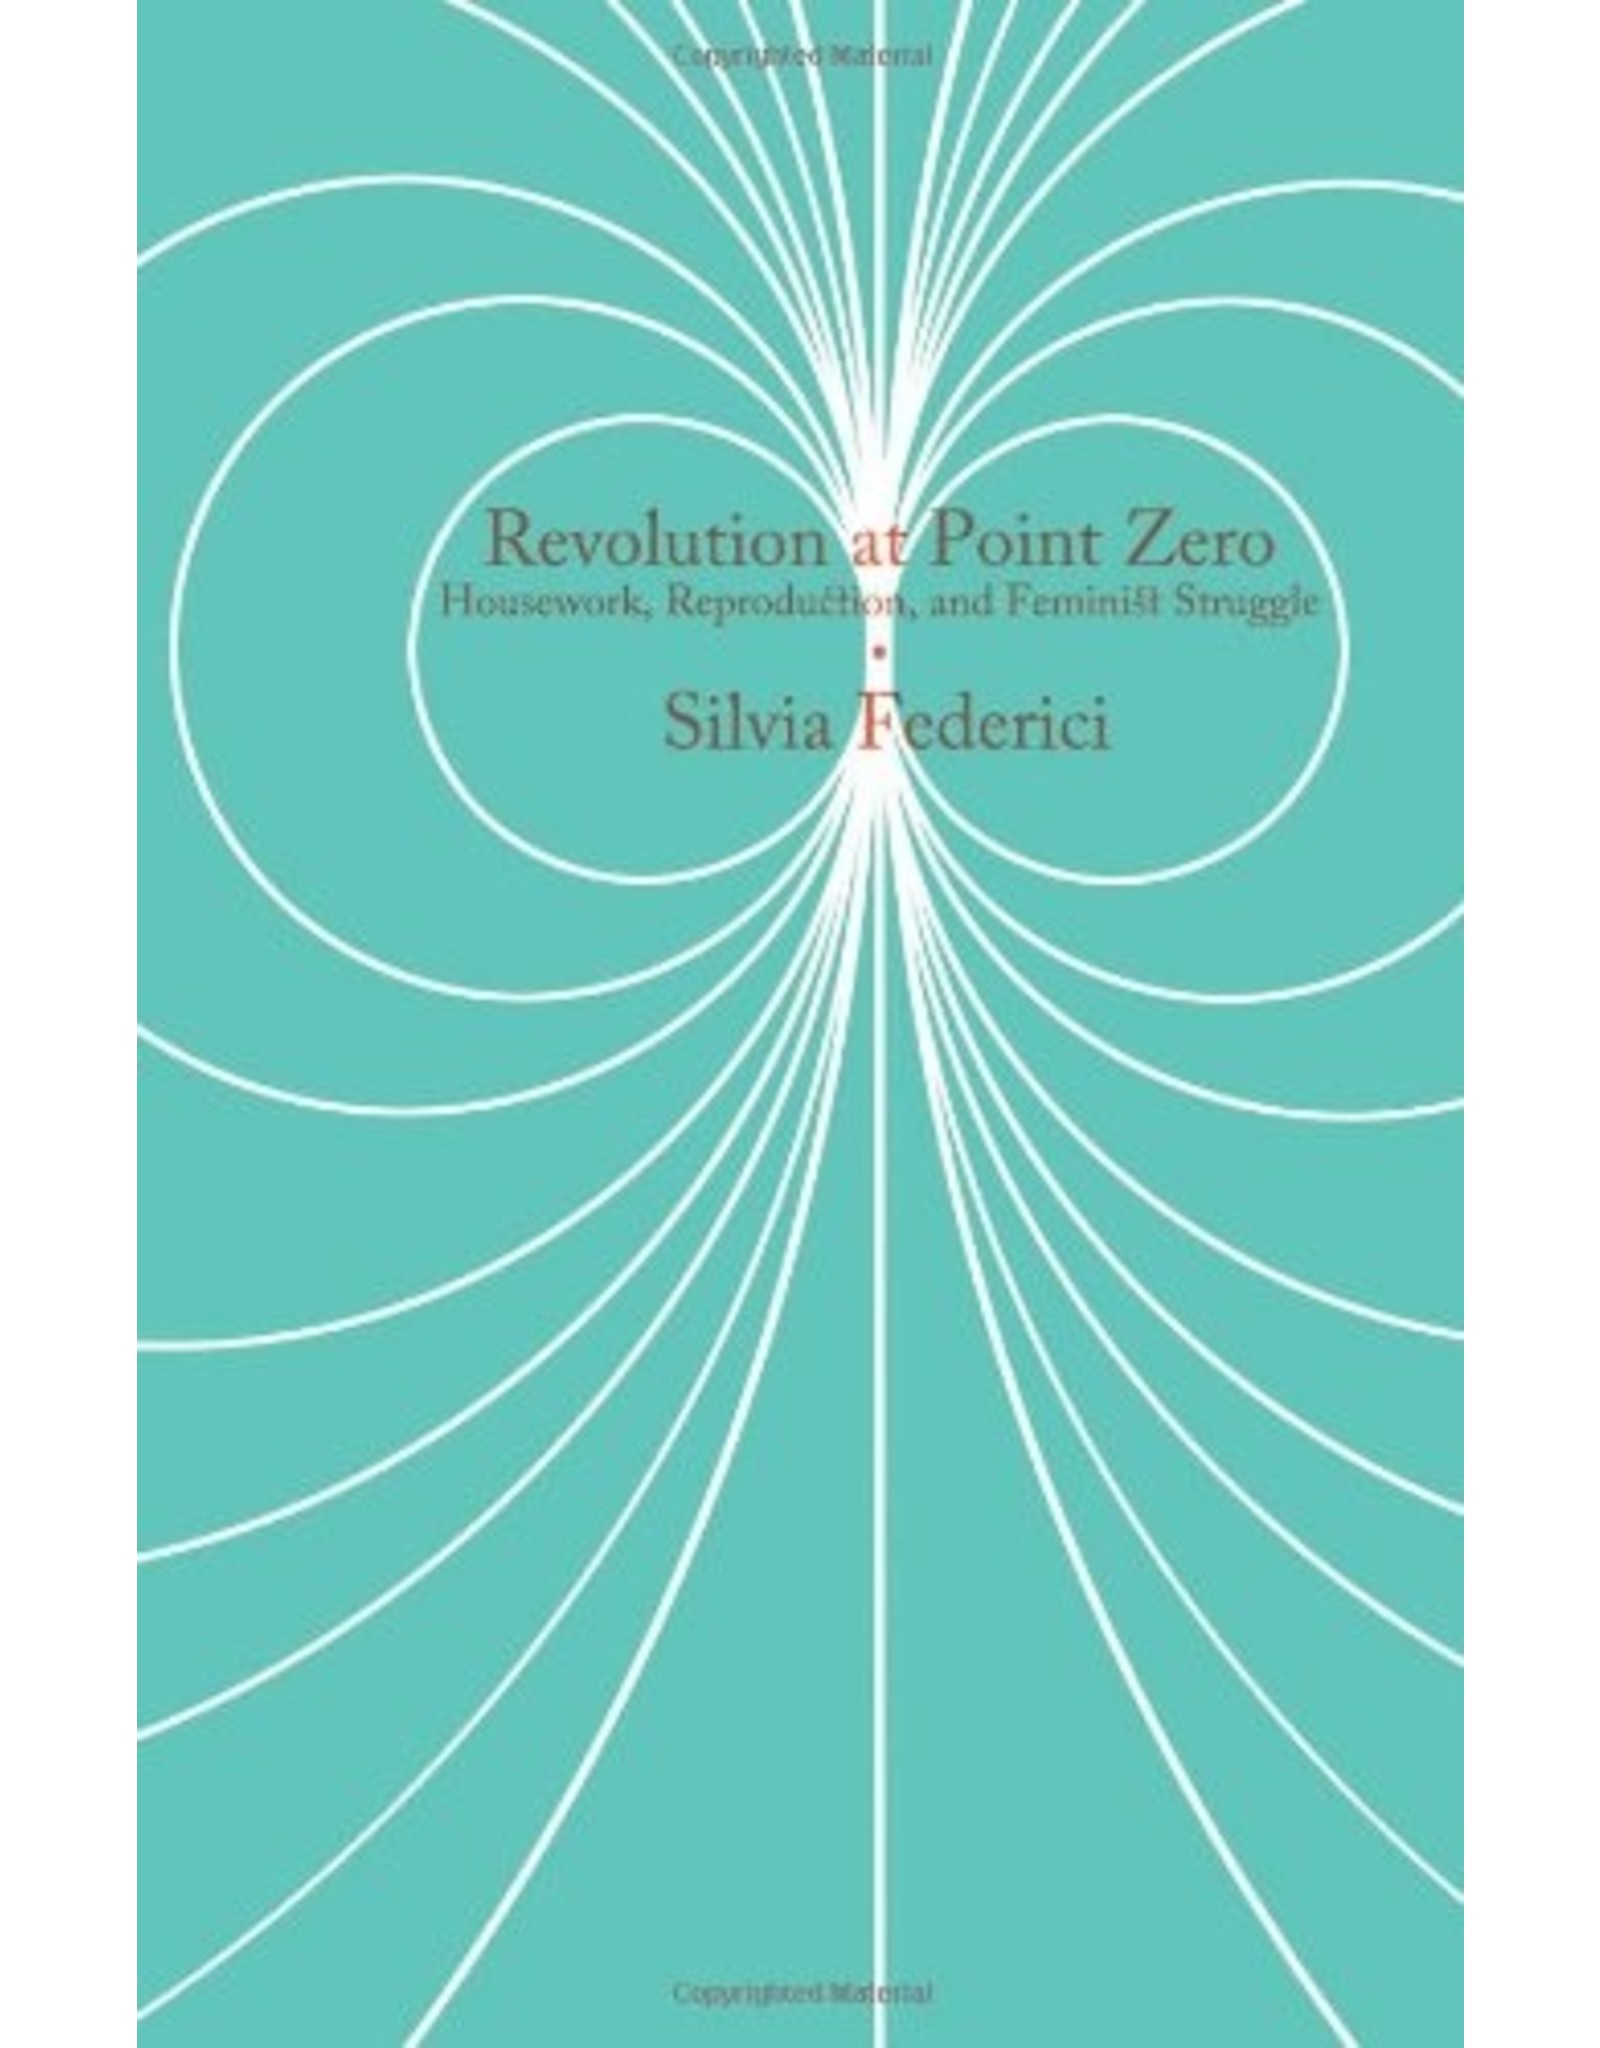 Literature Revolution at Point Zero: Housework, Reproduction and Feminist Struggle